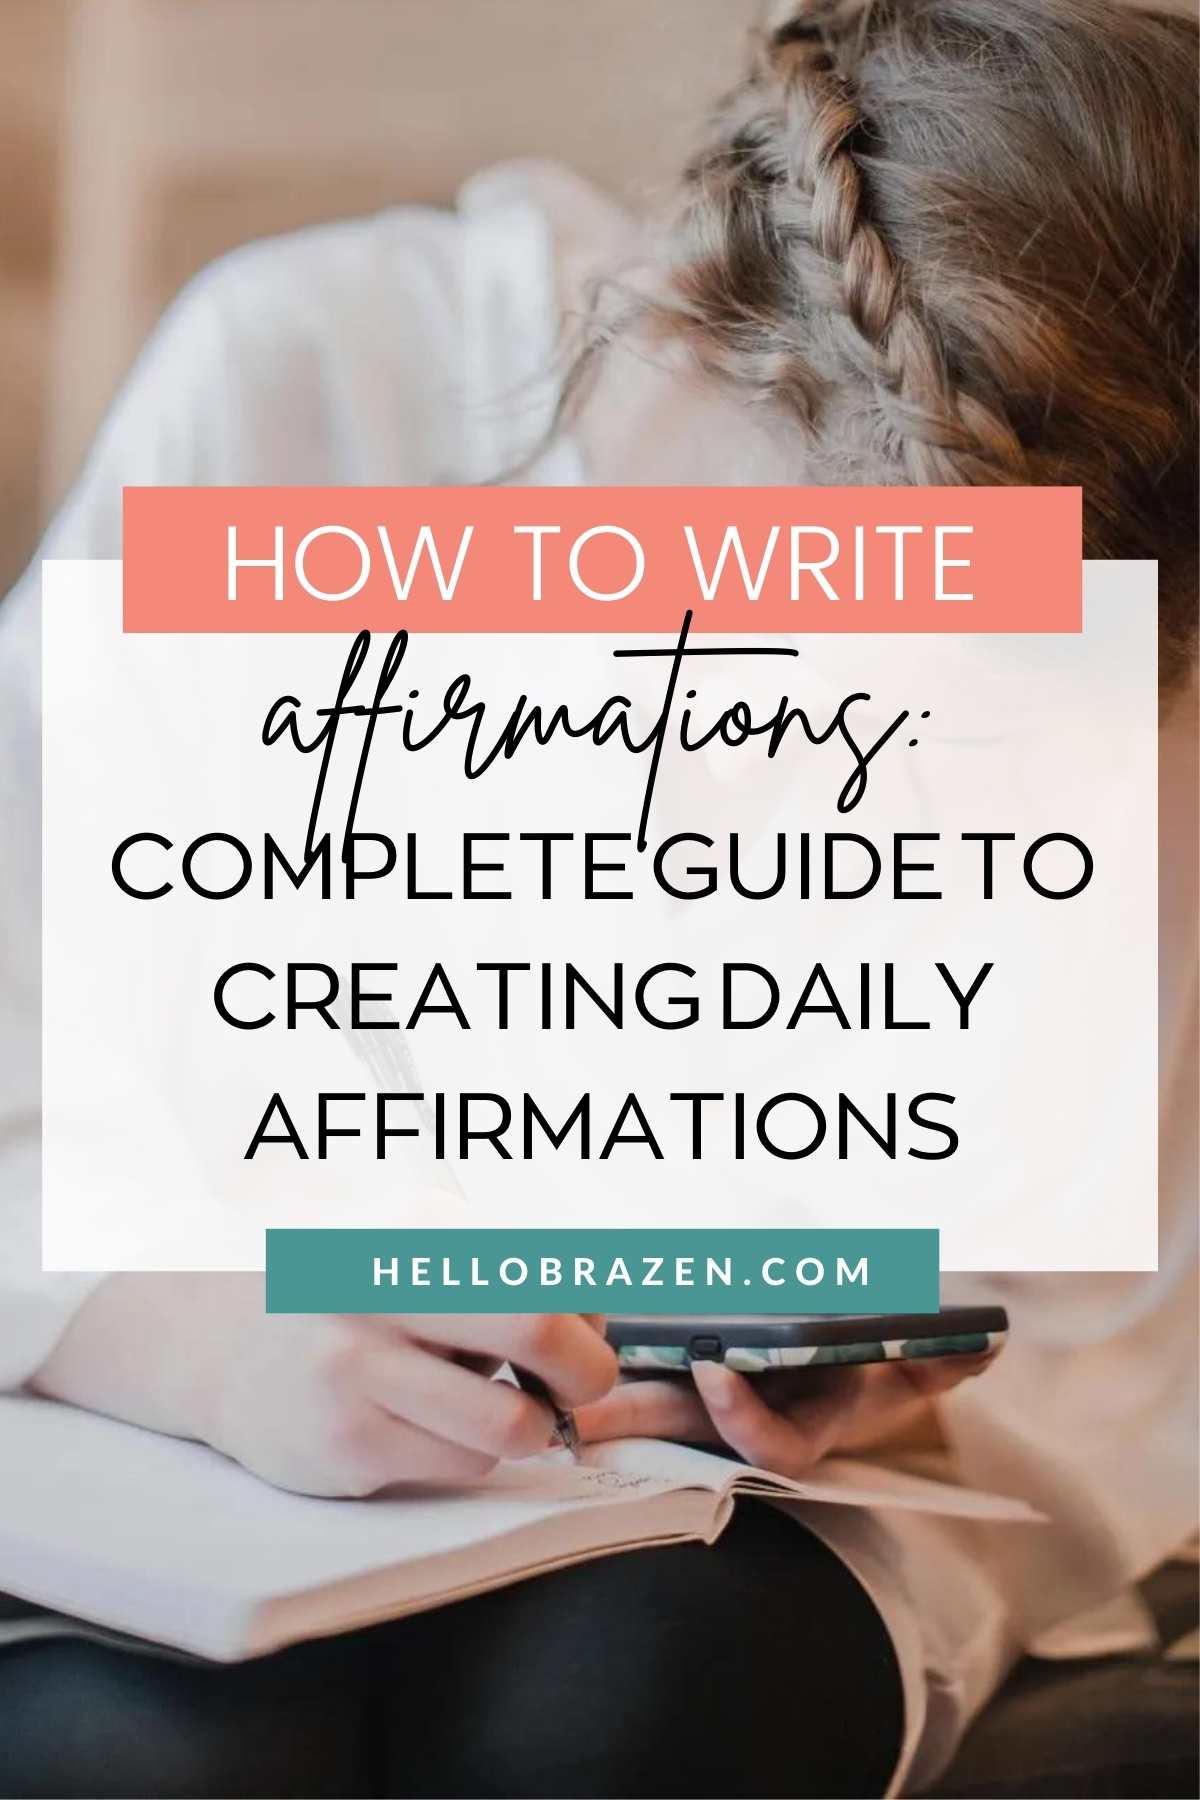 Learning how to write affirmations can be a powerful way to include positive affirmations in your daily life and be more positive in your day.